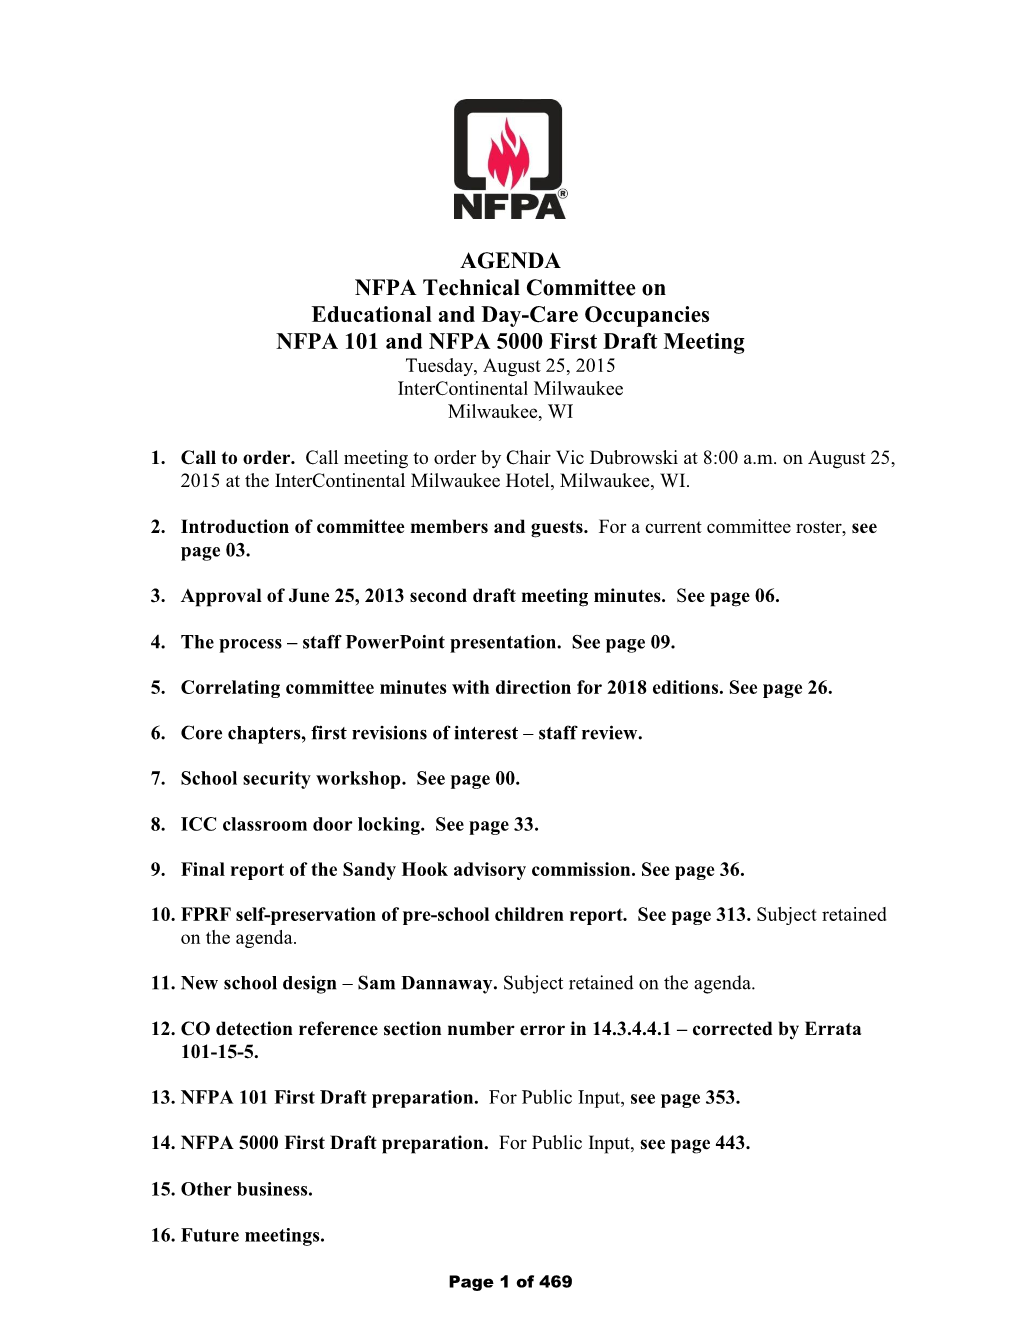 AGENDA NFPA Technical Committee on Educational and Day-Care